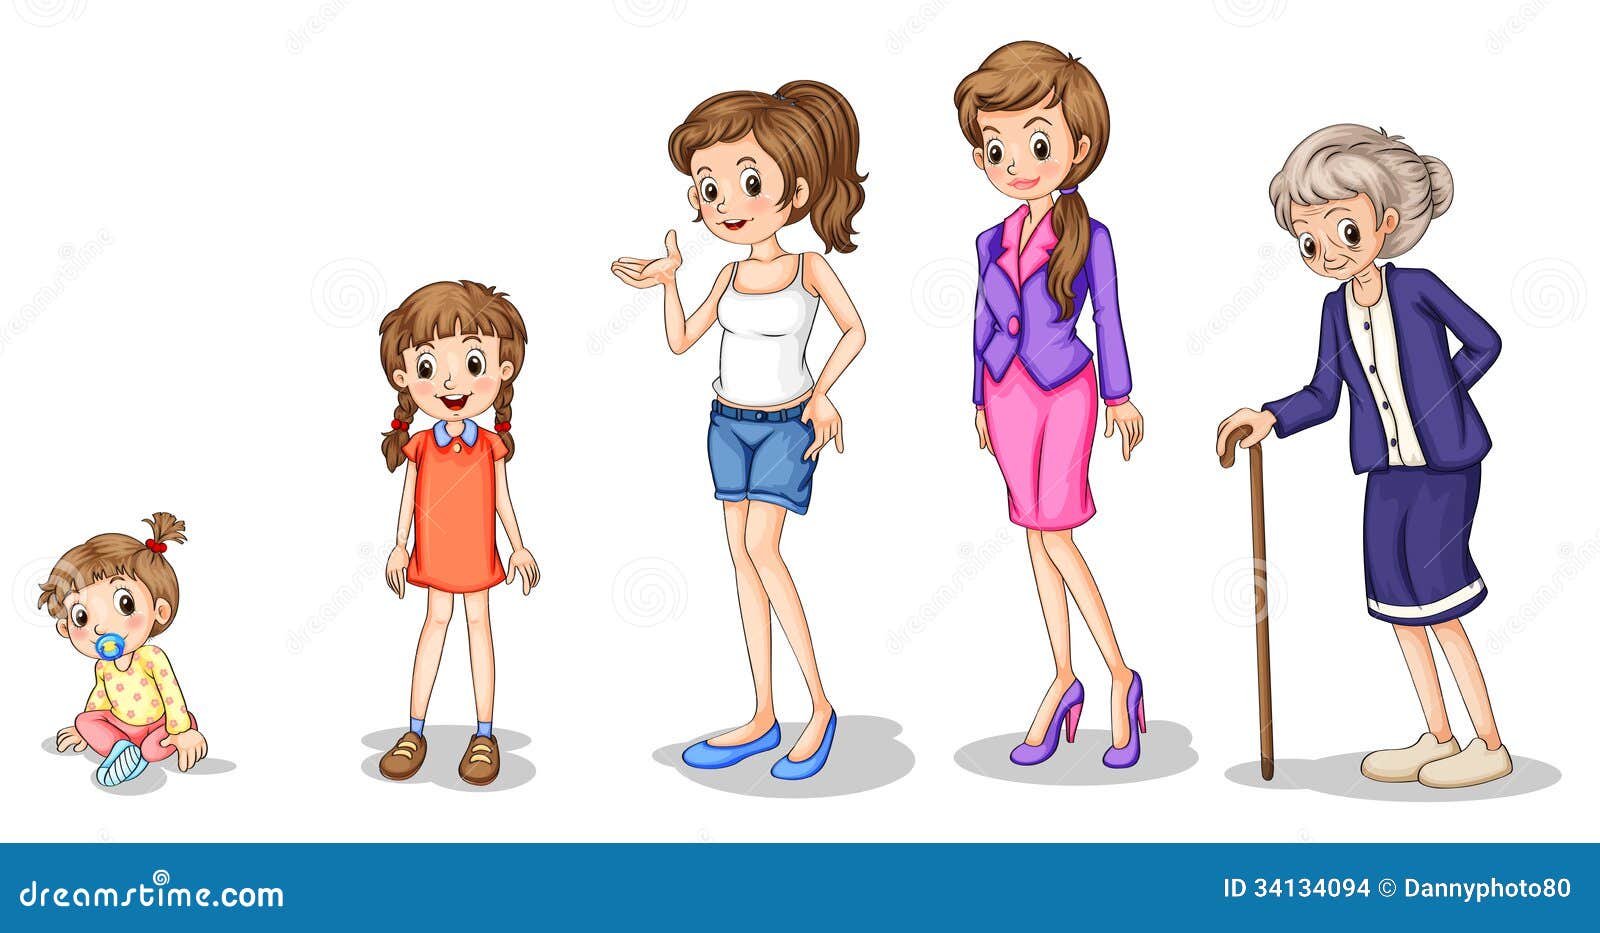 Phases Of A Growing Female Stock Images - Image: 34134094